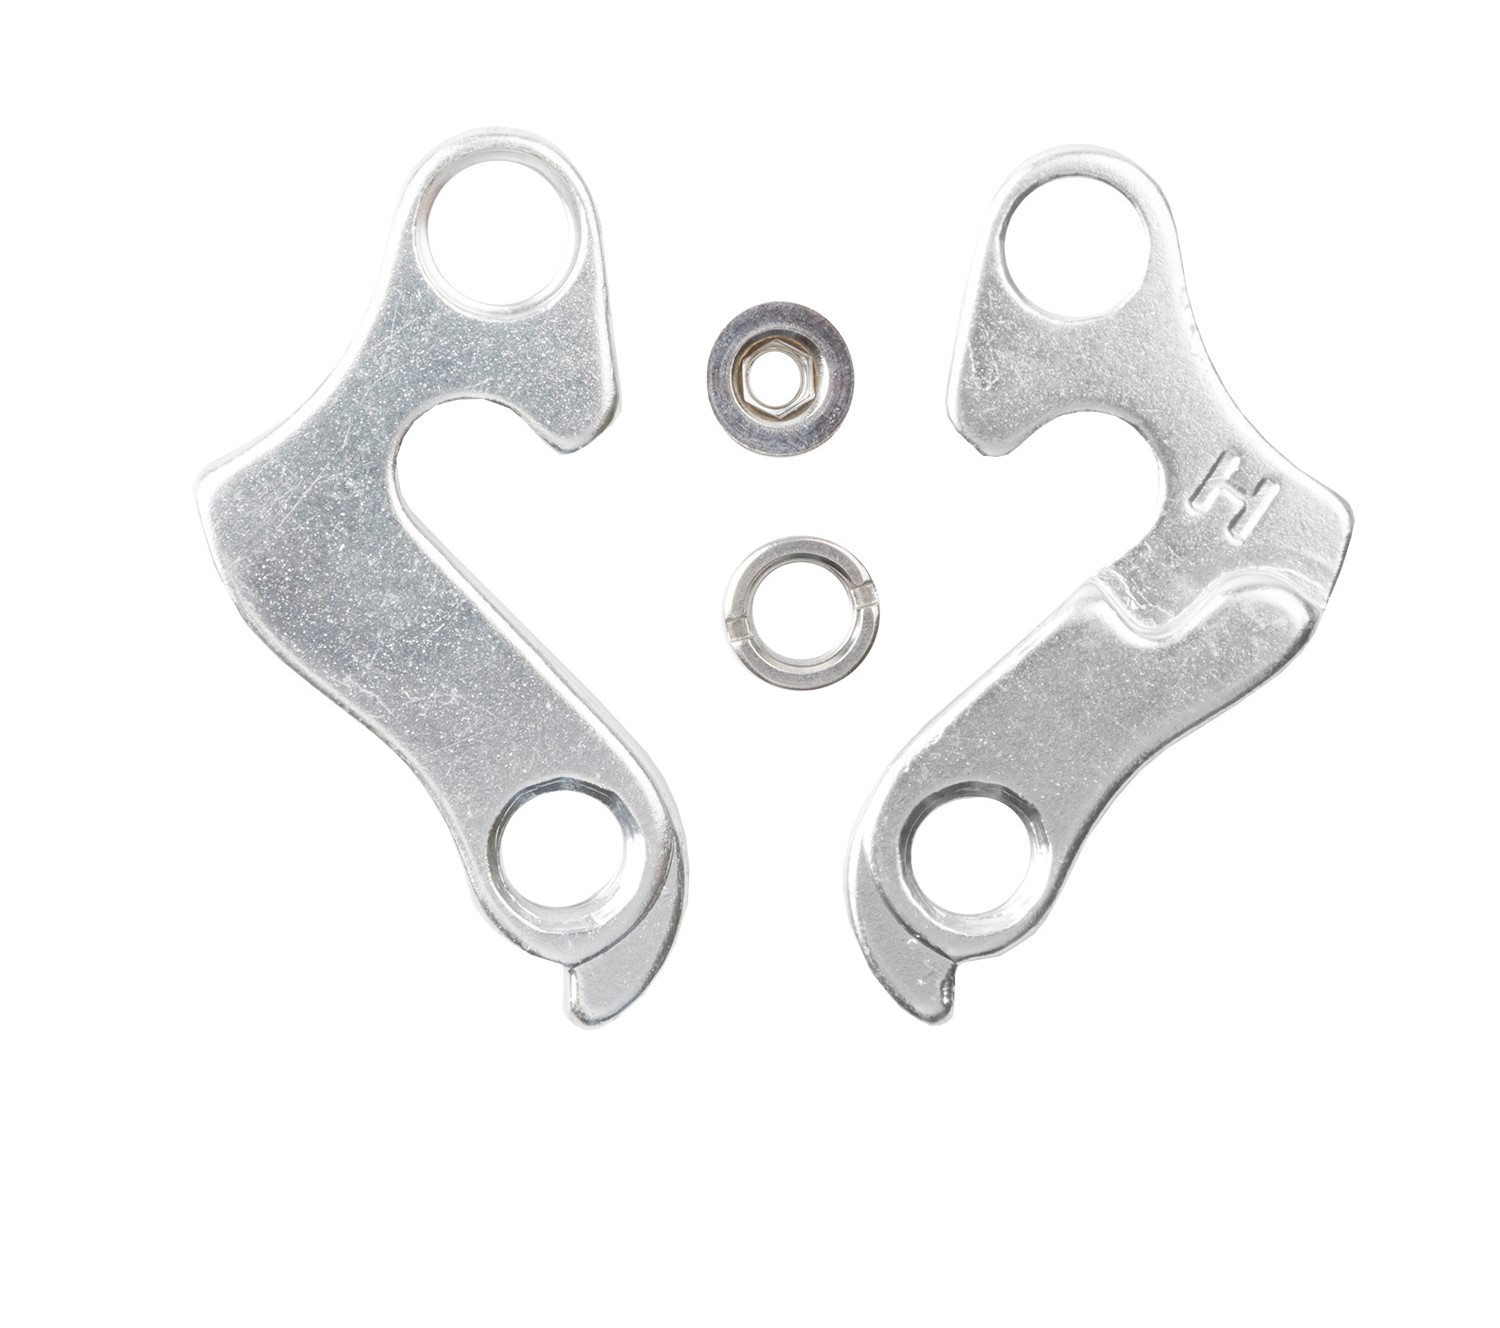 660858 S2 derailleur hanger – AVAILABLE IN SELECTED BIKE SHOPS